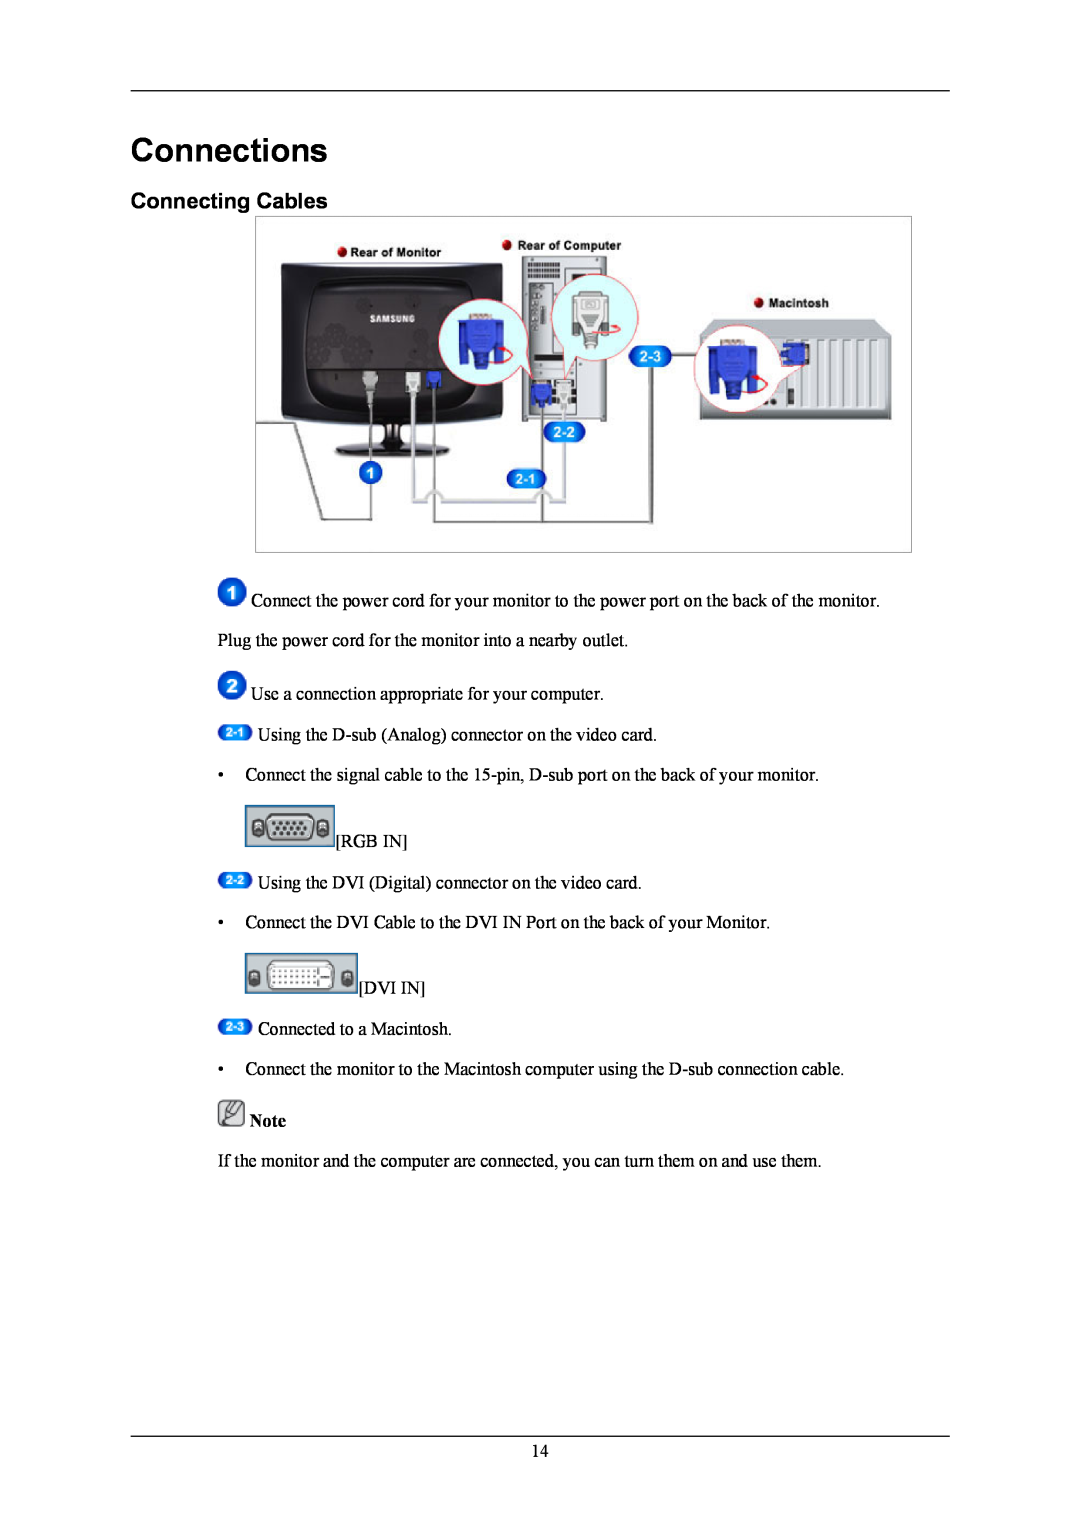 Samsung 2433BW user manual Connections, Connecting Cables 